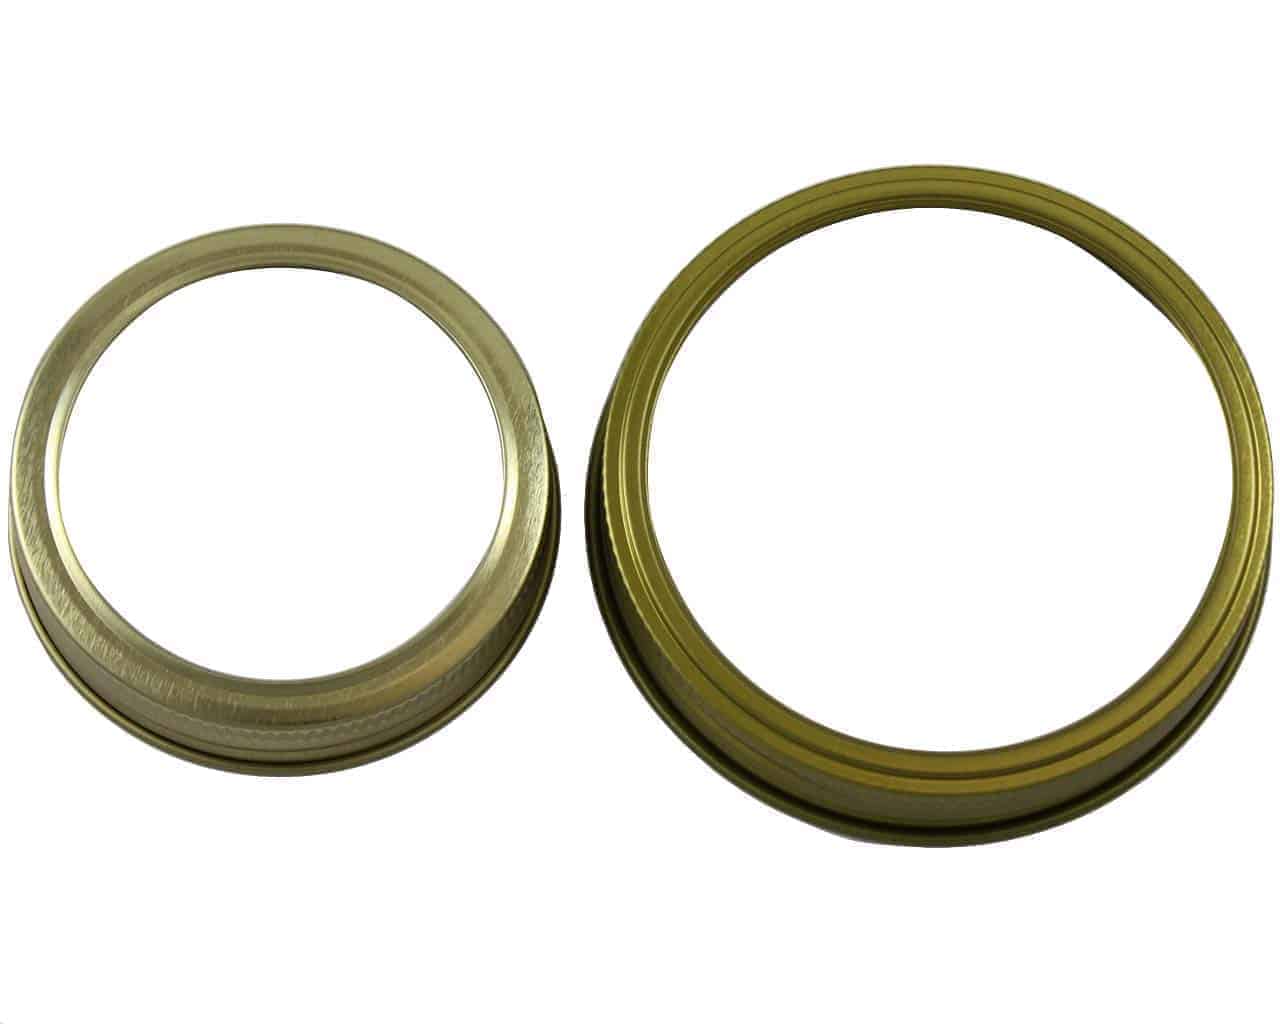 Gold bands rings for regular and wide mouth Mason jars